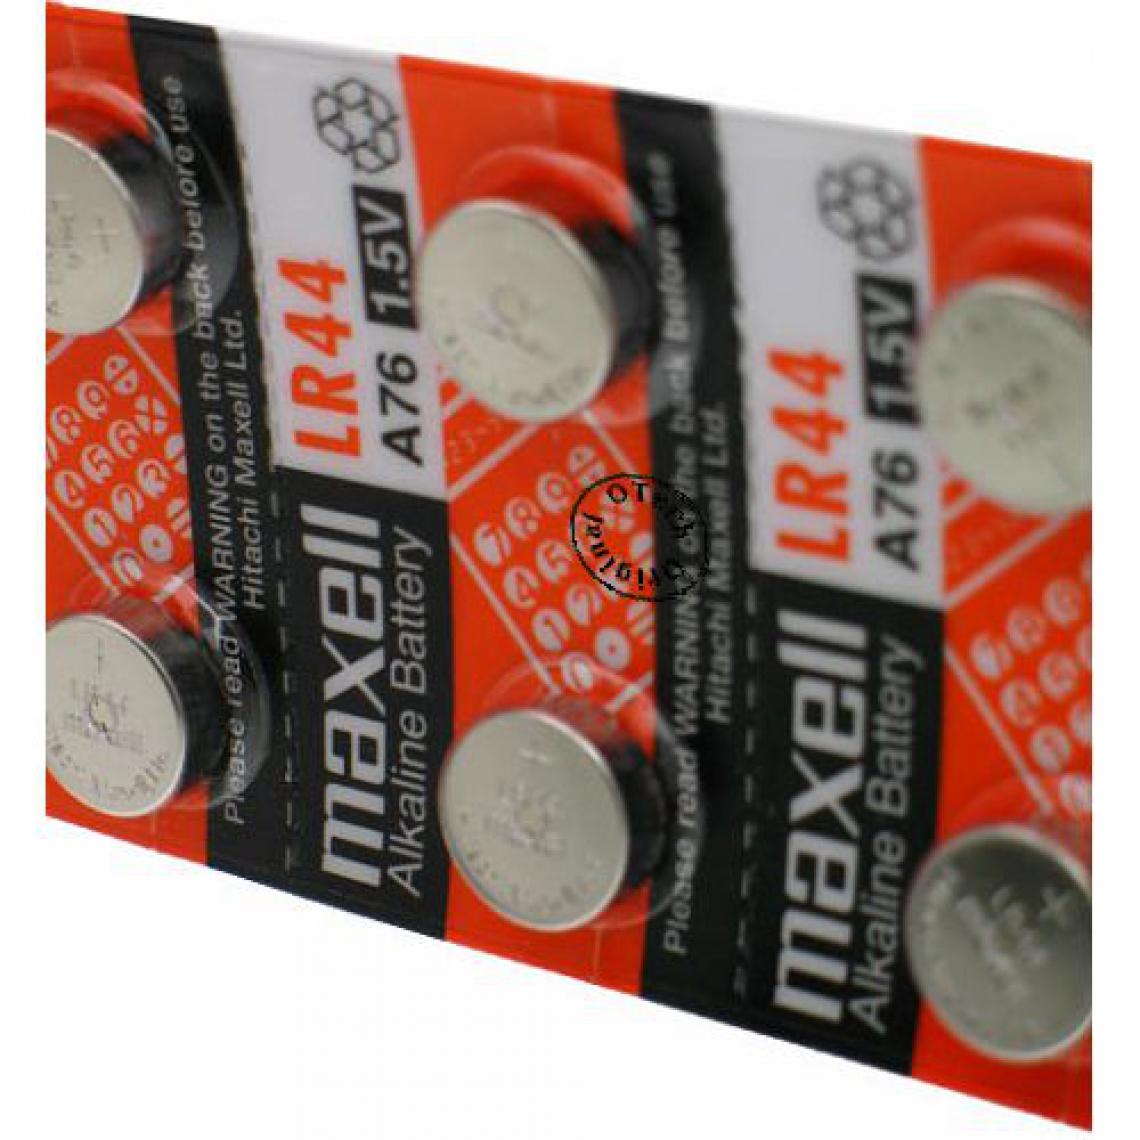 Otech - Pack de 10 piles maxell pour MAXELL EPX76 - Piles rechargeables